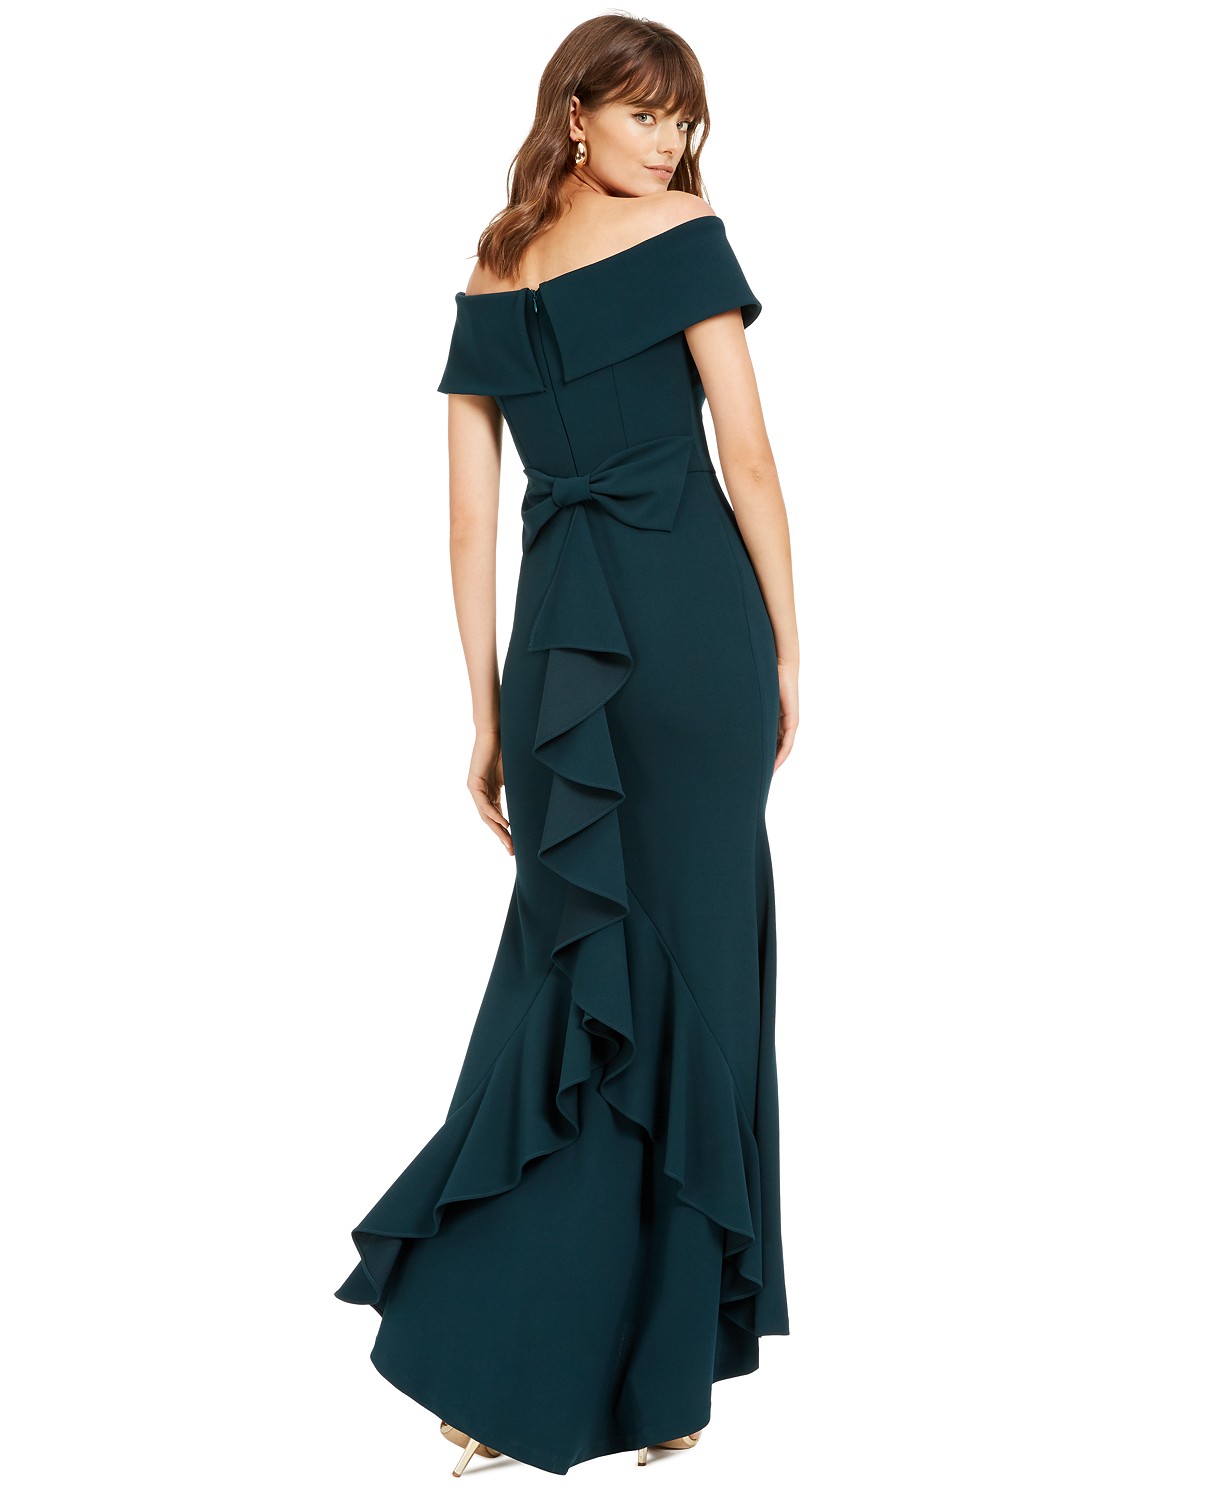 woocommerce-673321-2209615.cloudwaysapps.com-betsy-amp-adam-womens-green-off-the-shoulder-bow-back-gown-dress